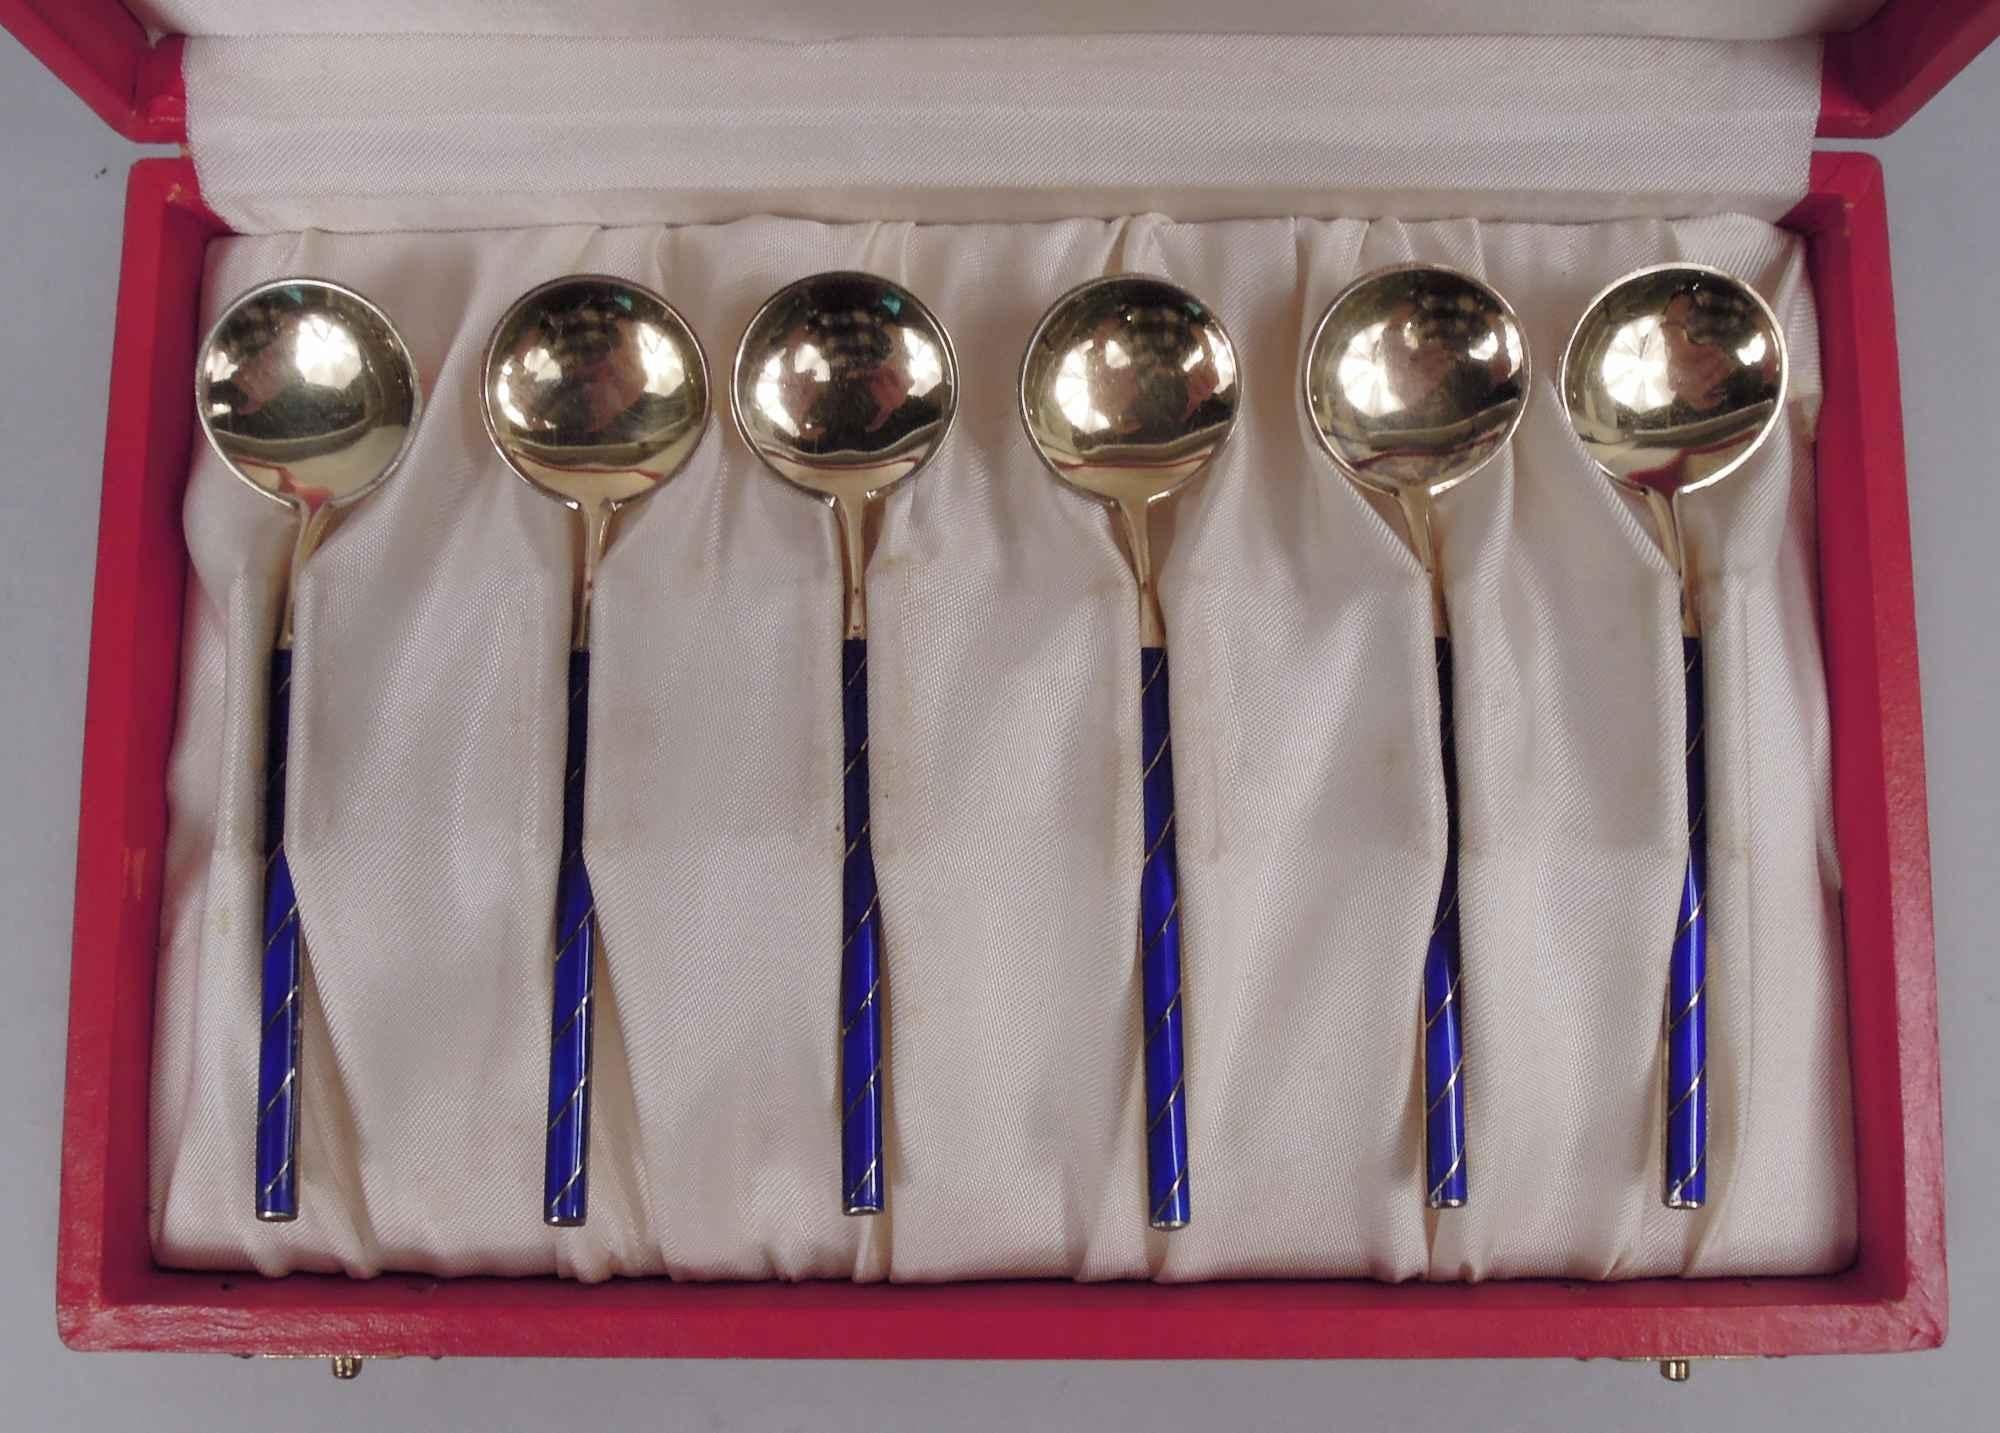 Set of 6 Midcentury Modern sterling silver demitasse spoons. Made by Tostrup in Norway. Each: Straight and narrow stem with round and shallow bowl. Double-sided gilding. Cobalt enamel on stem front in diagonal frames. In original red case with